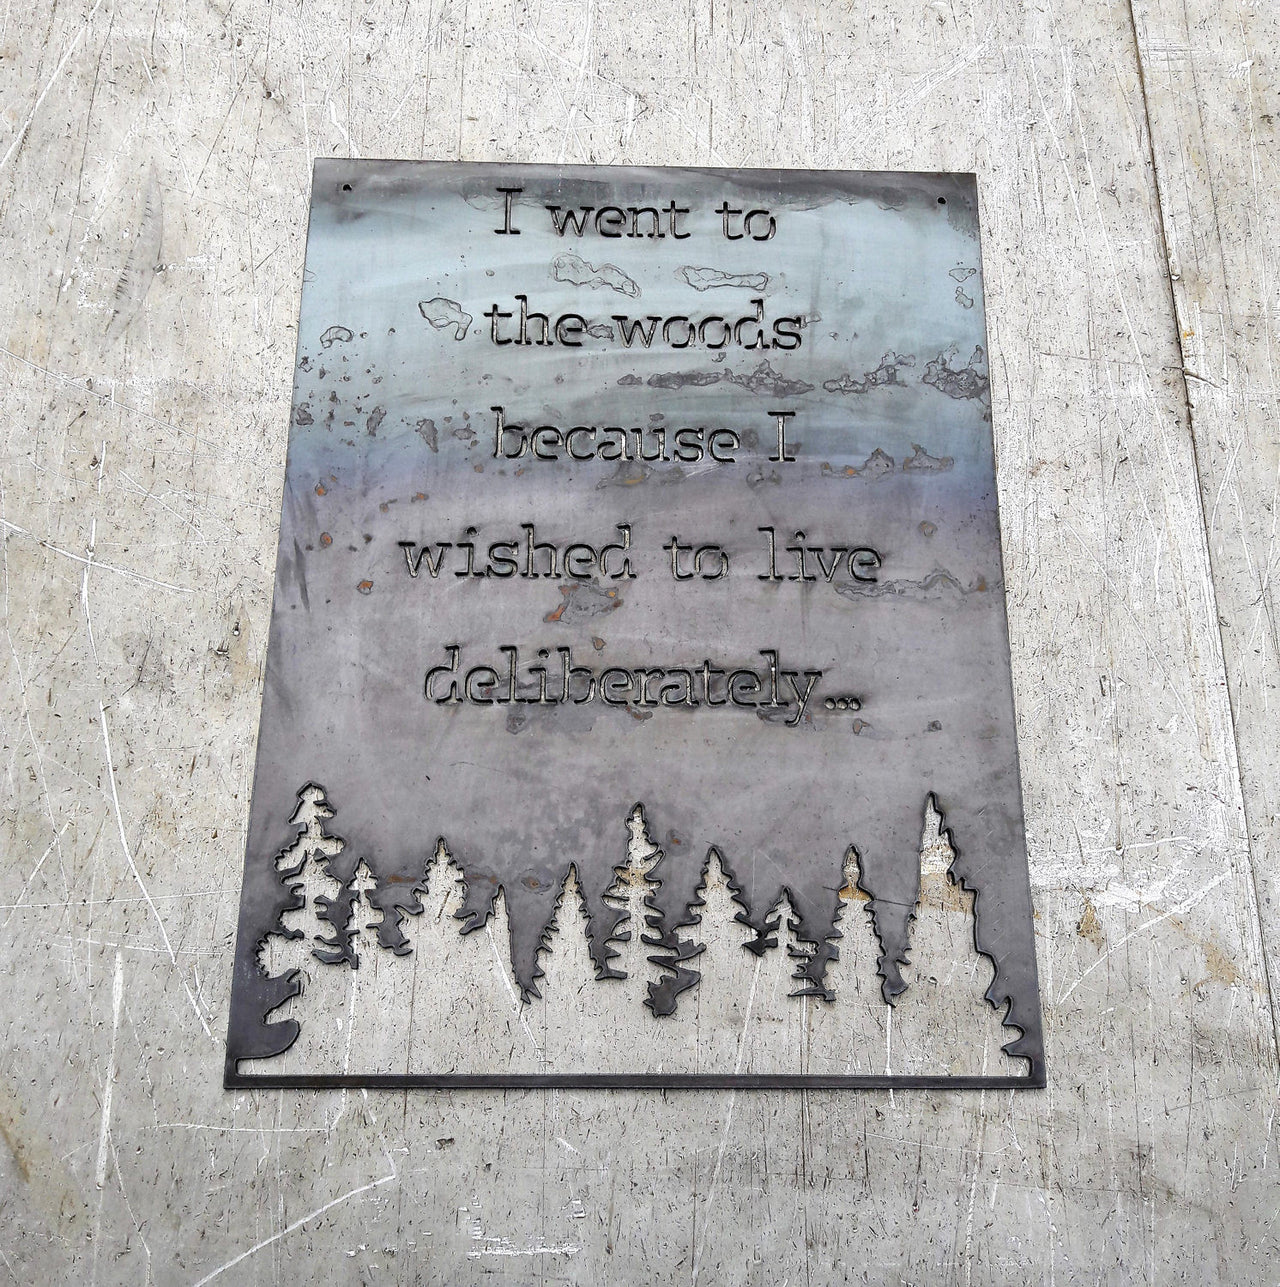 Rectangle metal sign, with a famous quote said by David Thoreau which reads, "I Went to the Woods because I Wished to Live Deliberately..."